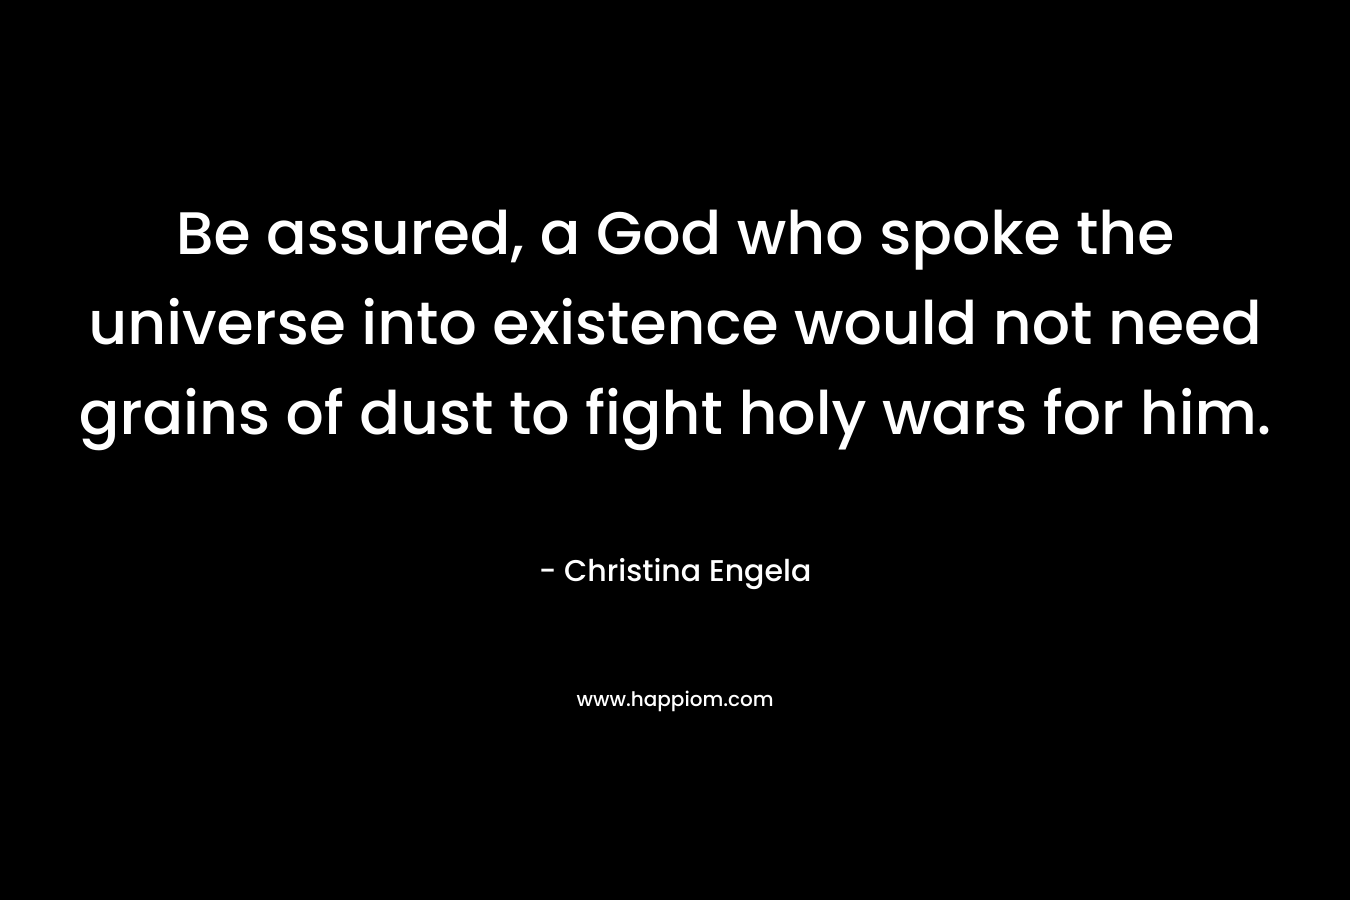 Be assured, a God who spoke the universe into existence would not need grains of dust to fight holy wars for him. – Christina Engela